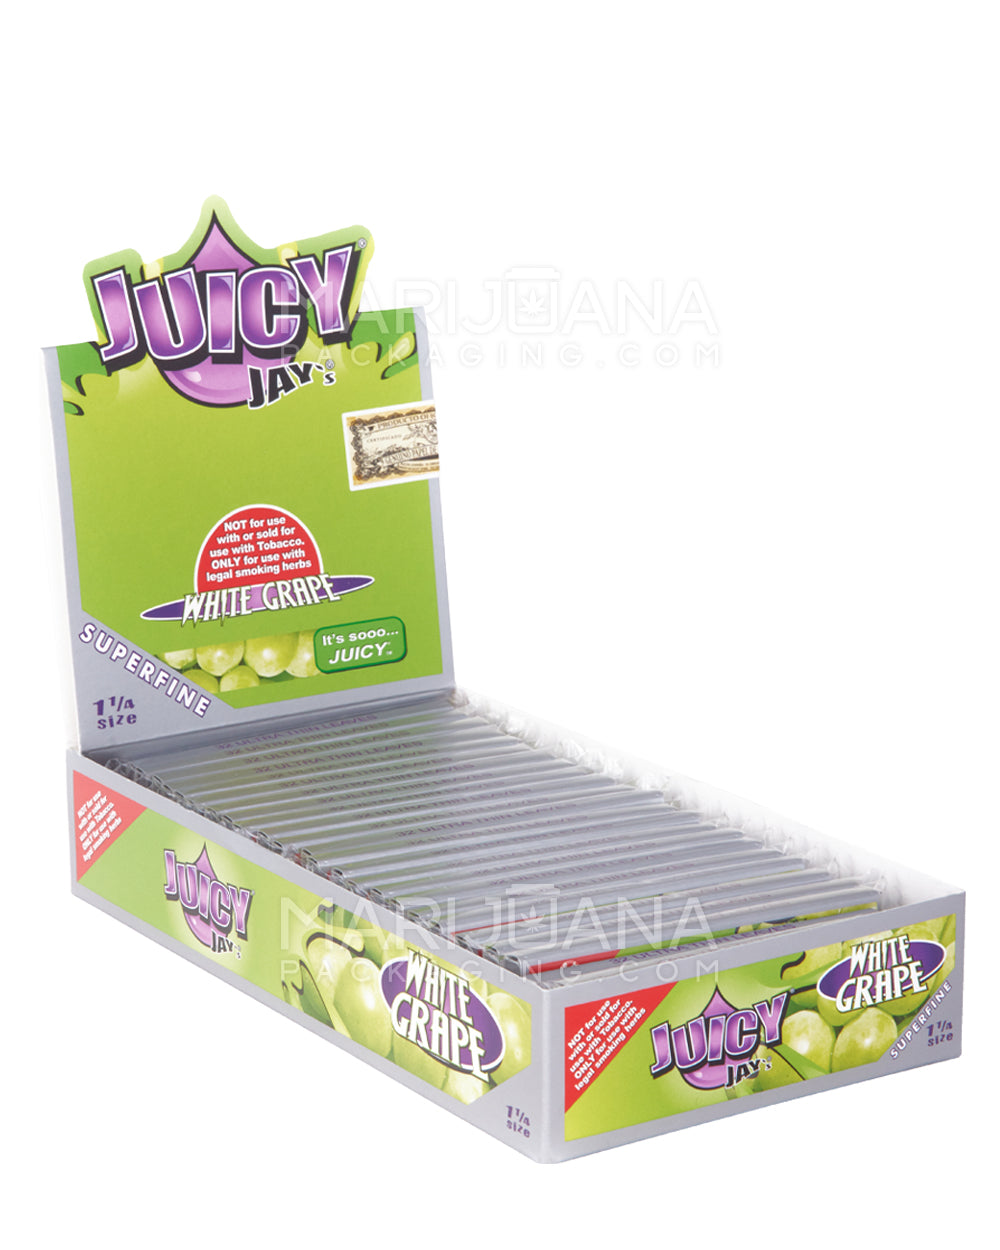 JUICY JAY'S | 'Retail Display' 1 1/4 Size Hemp Rolling Papers | 76mm - White Grape - 24 Count - 1